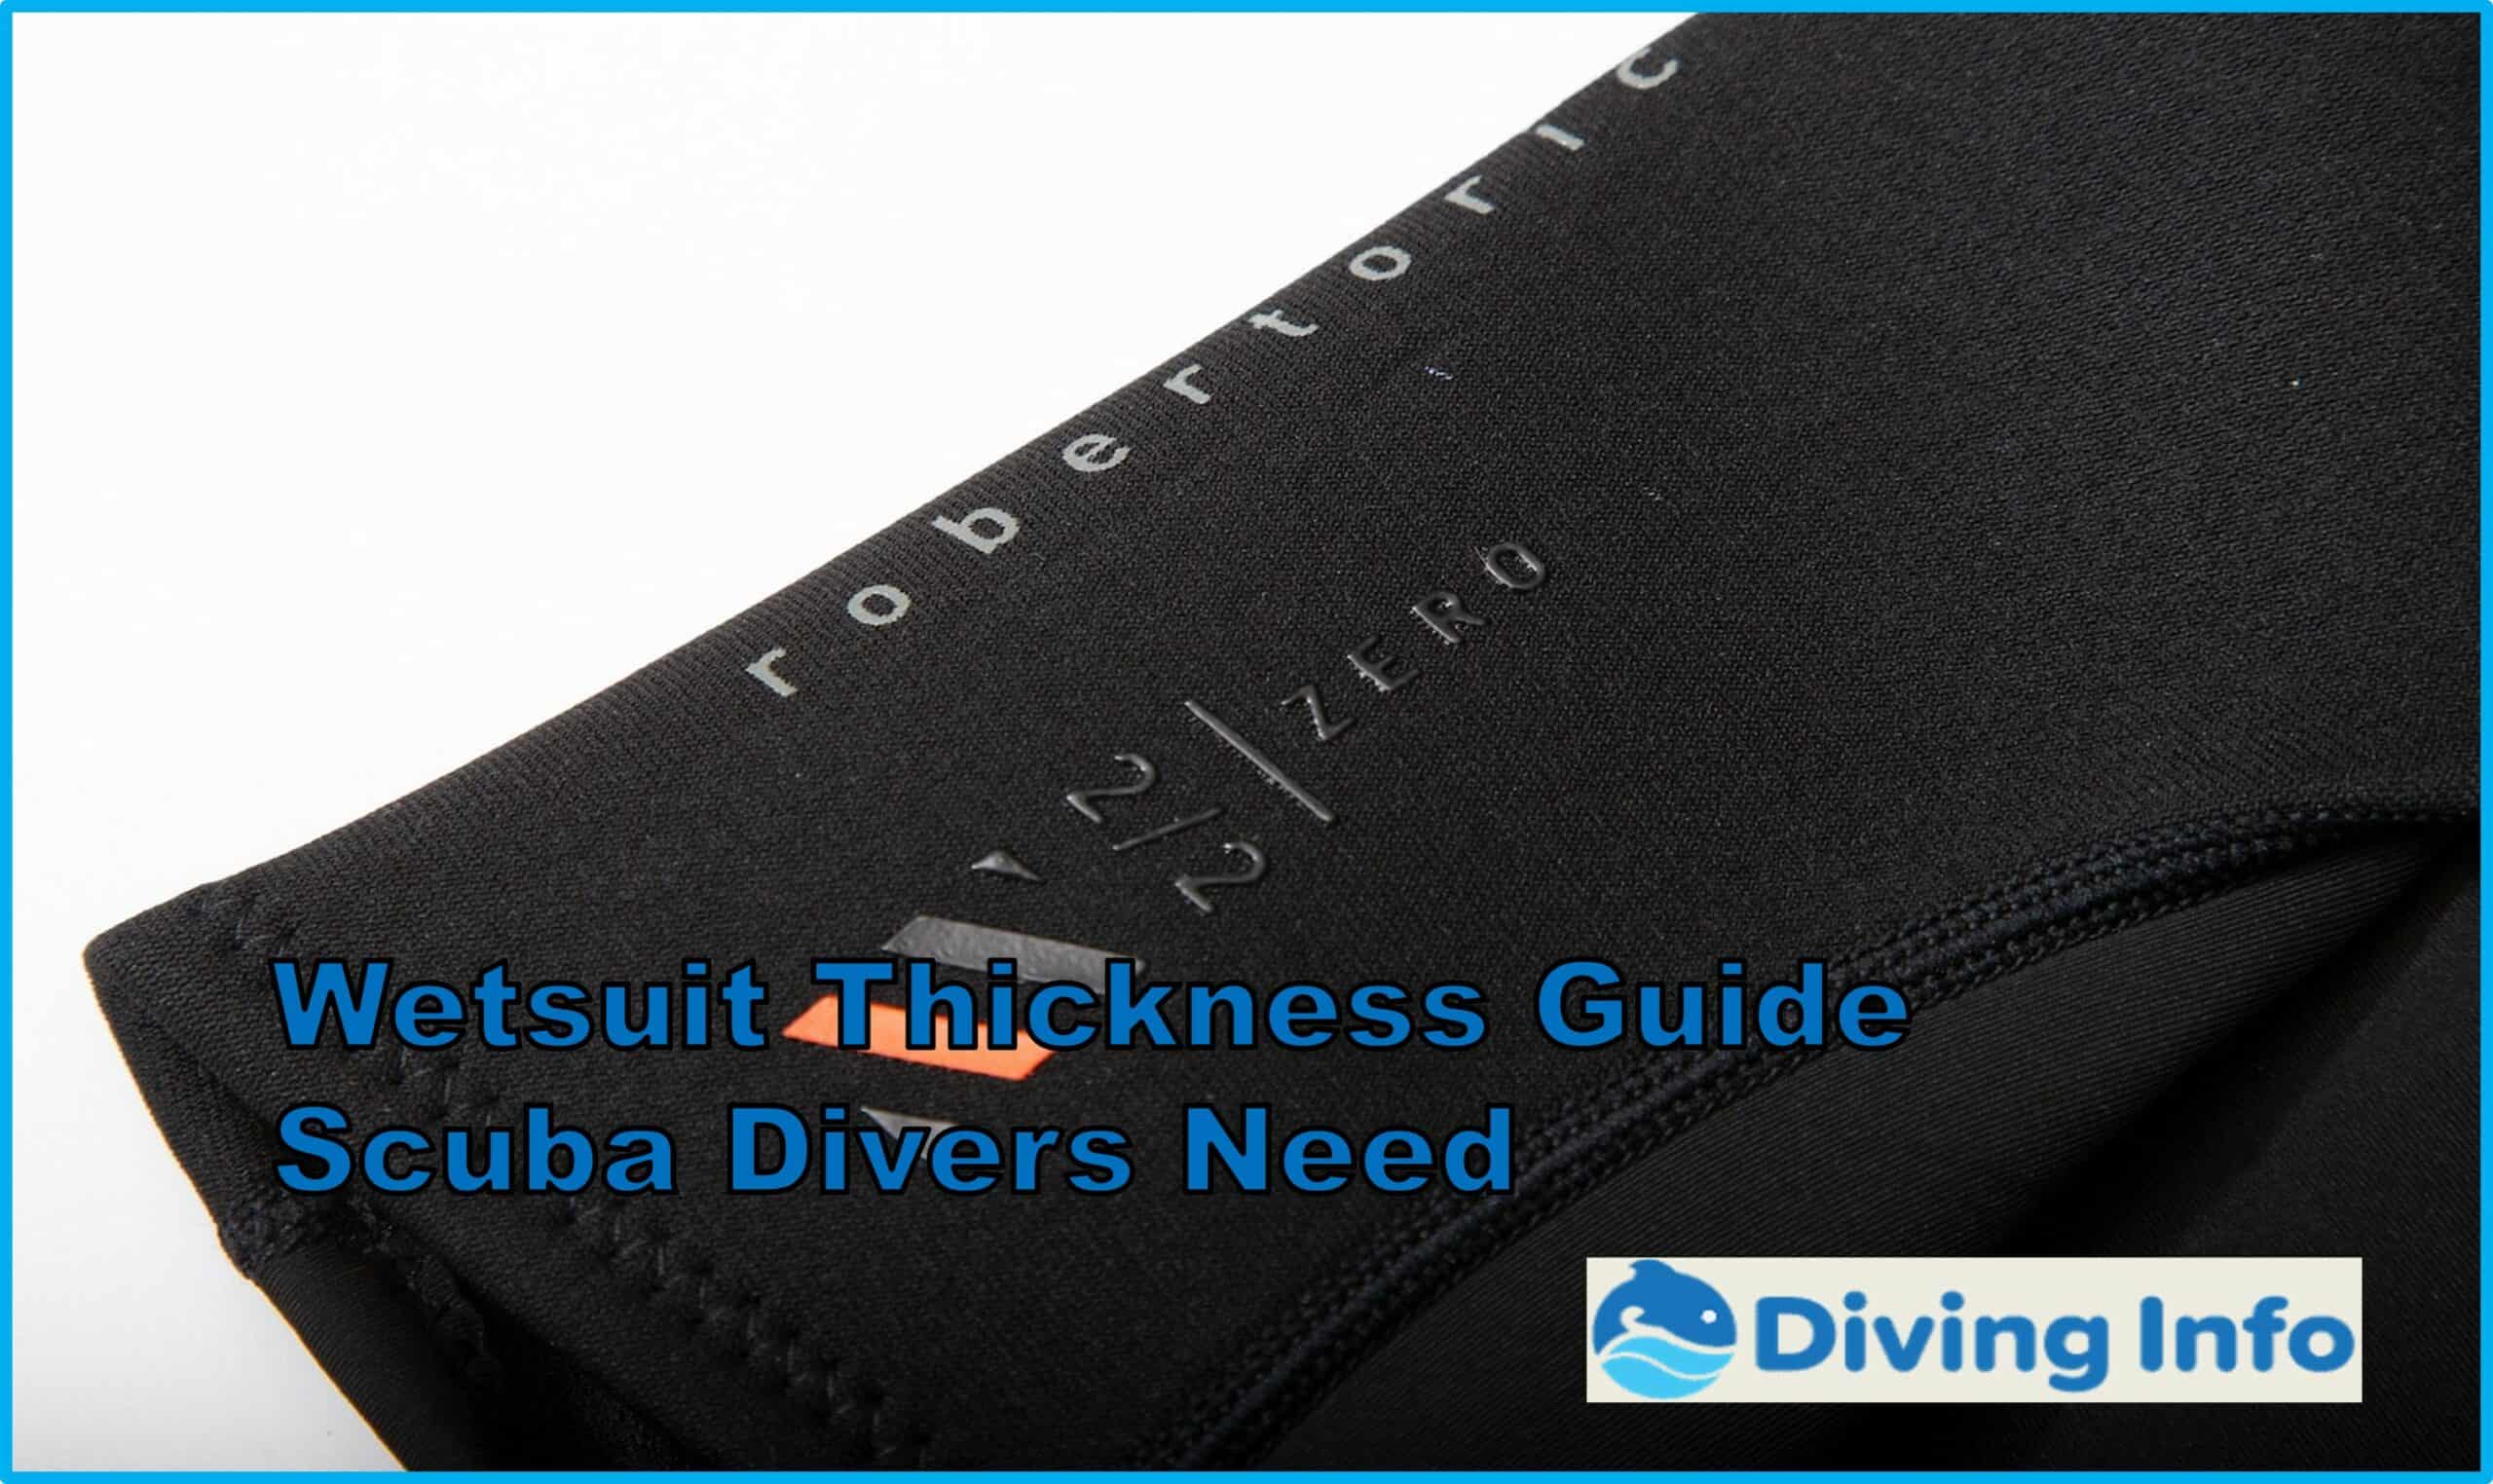 Wetsuit Thickness Guide Scuba Divers Need